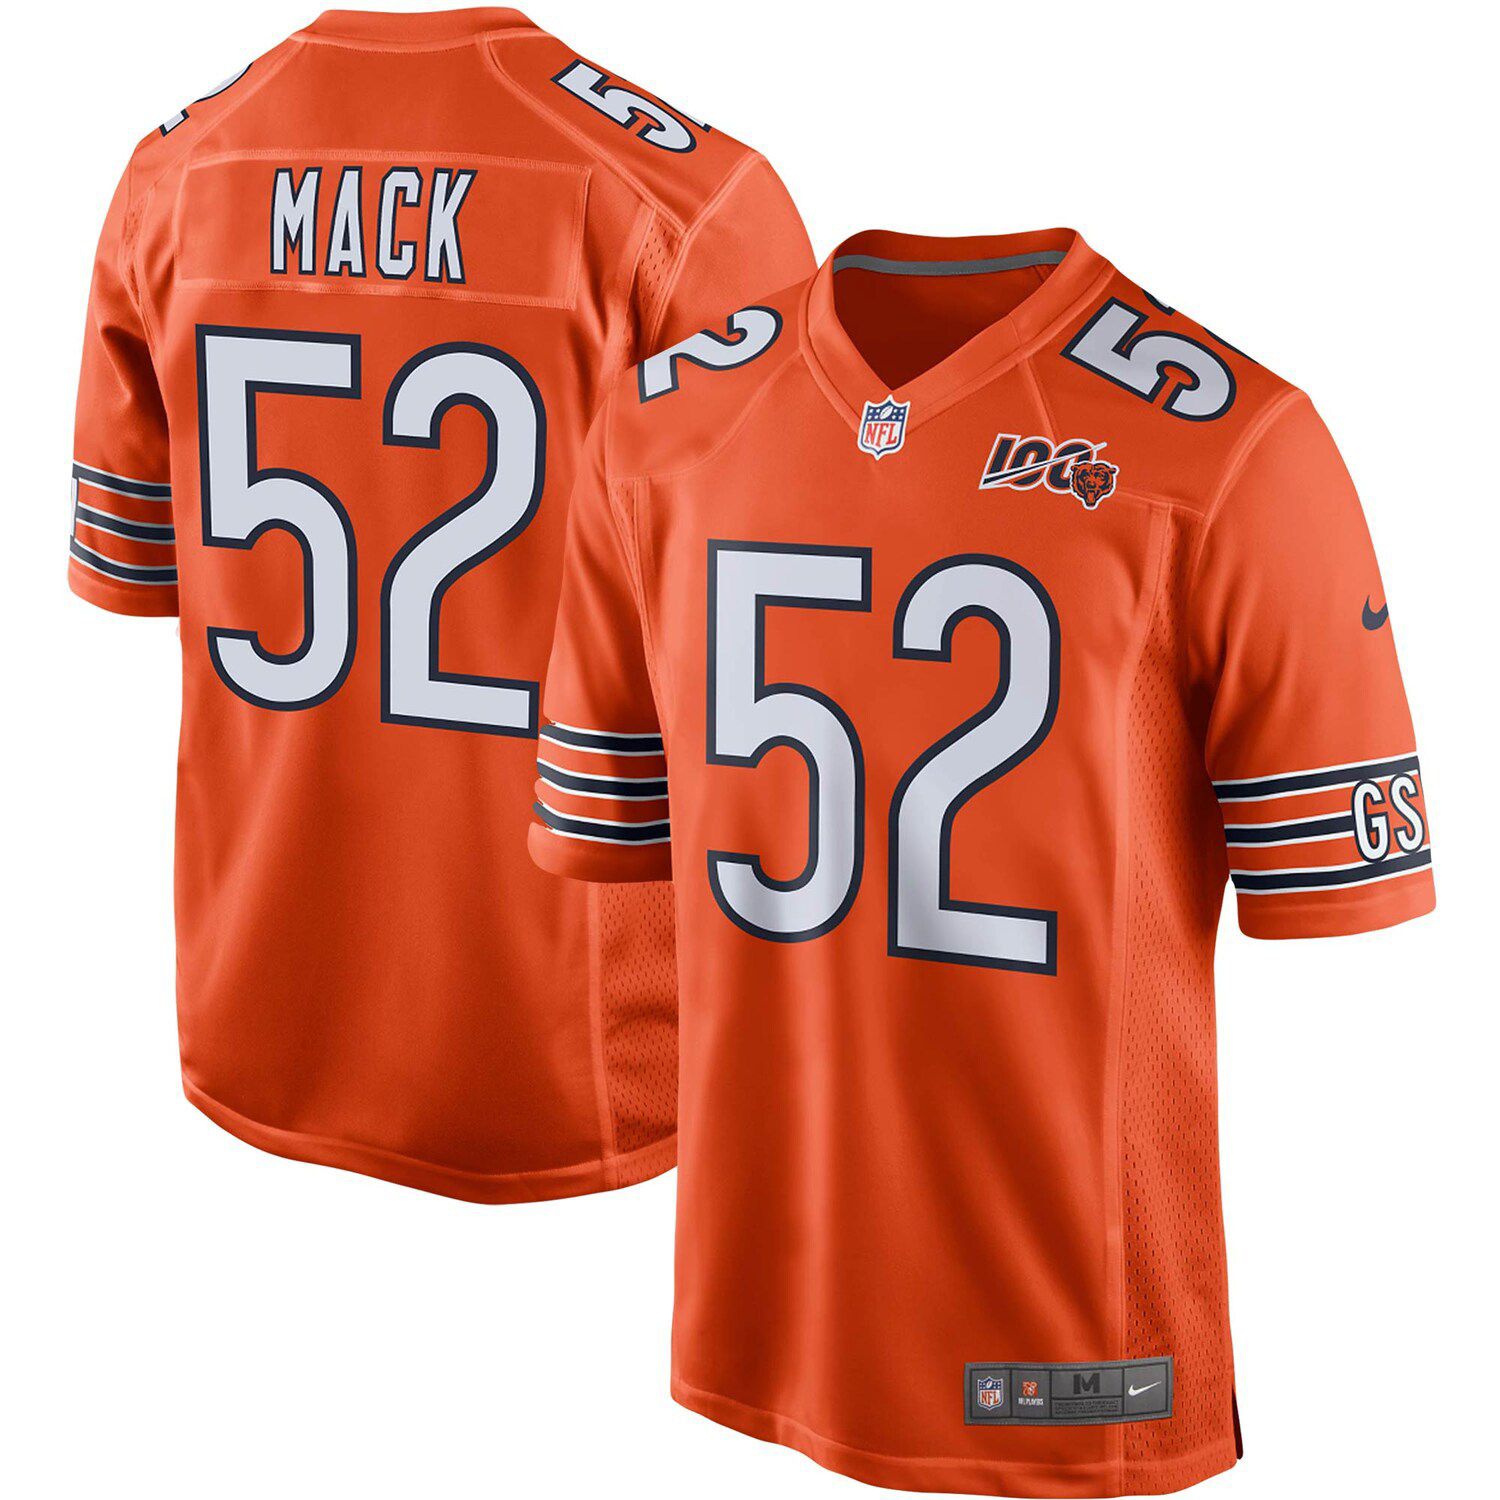 chicago bears 100th jersey